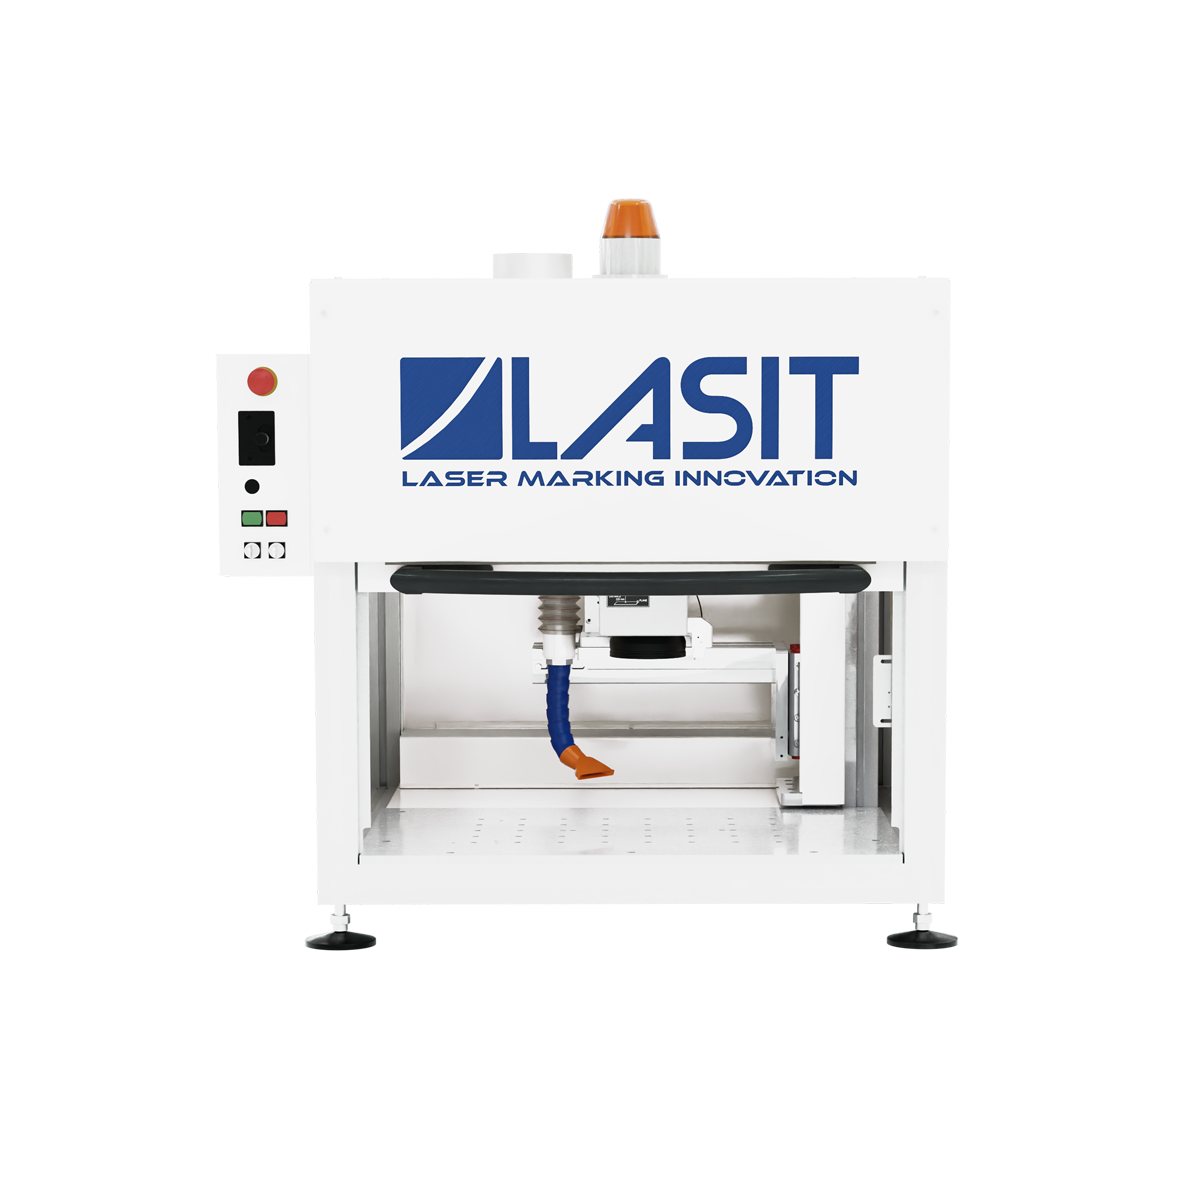 Minimark_front_web LASIT answers the ten most common questions on laser marking